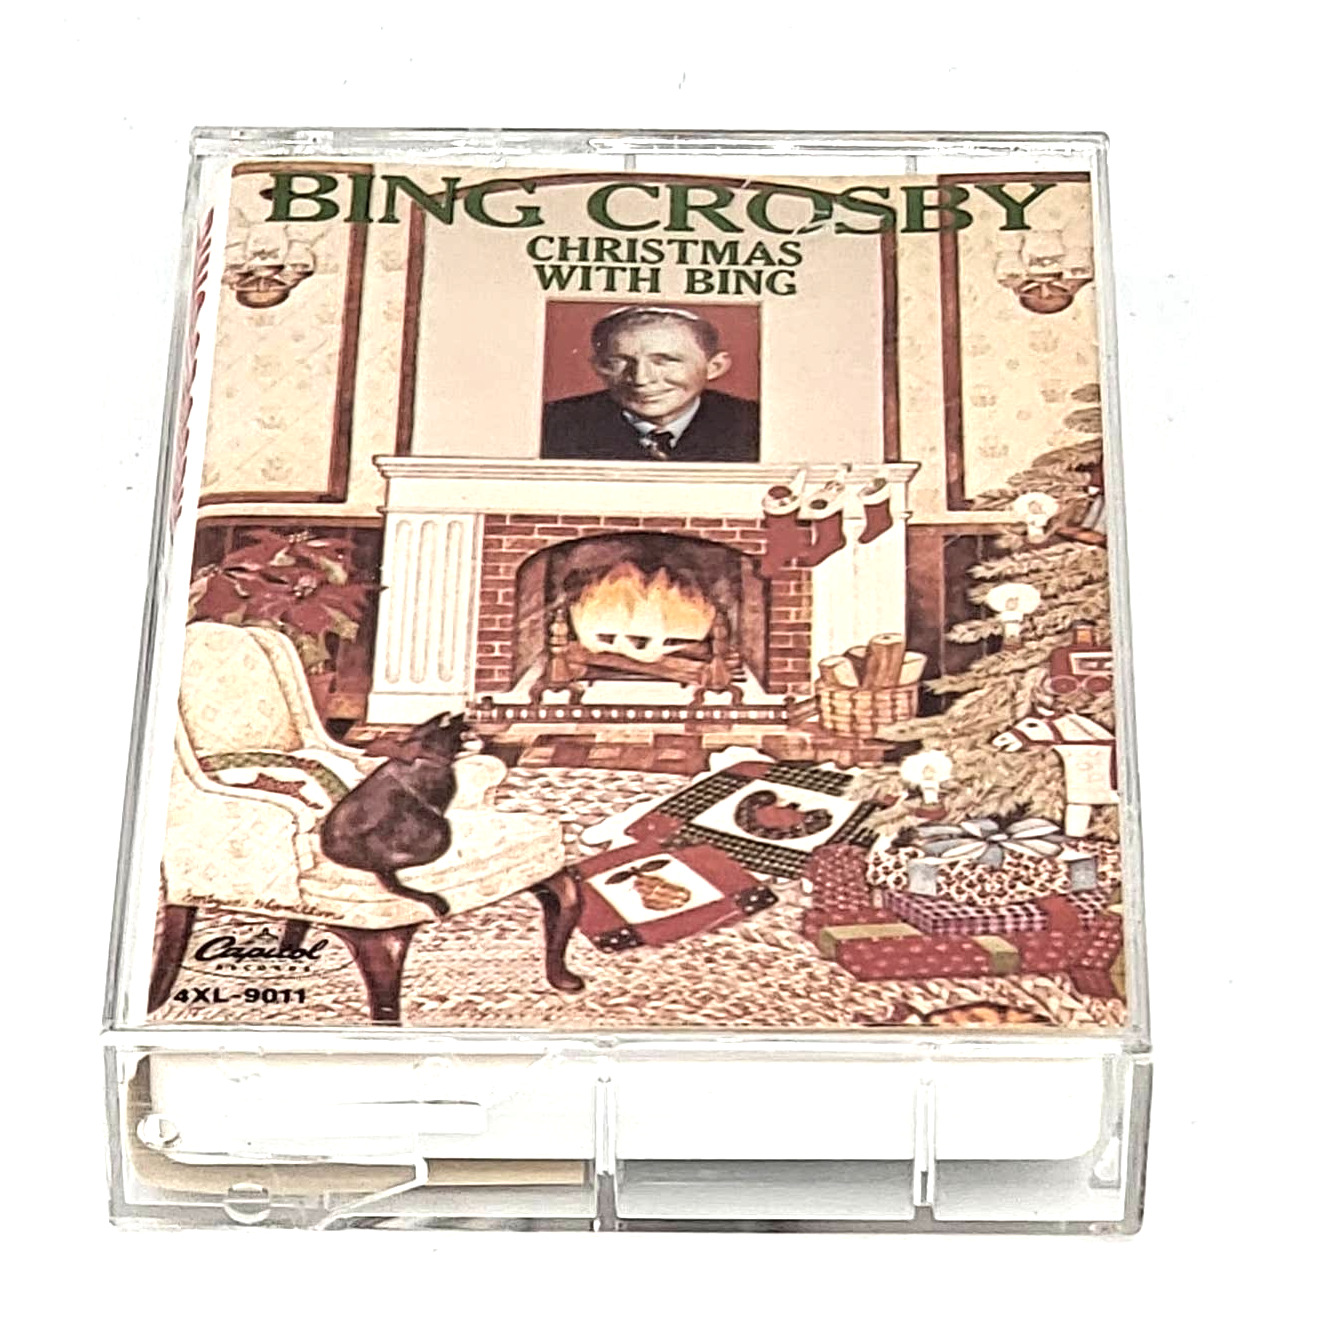 Vintage Bing Crosby 1984  cassette tape  4XL  9011 Christmas with Bing